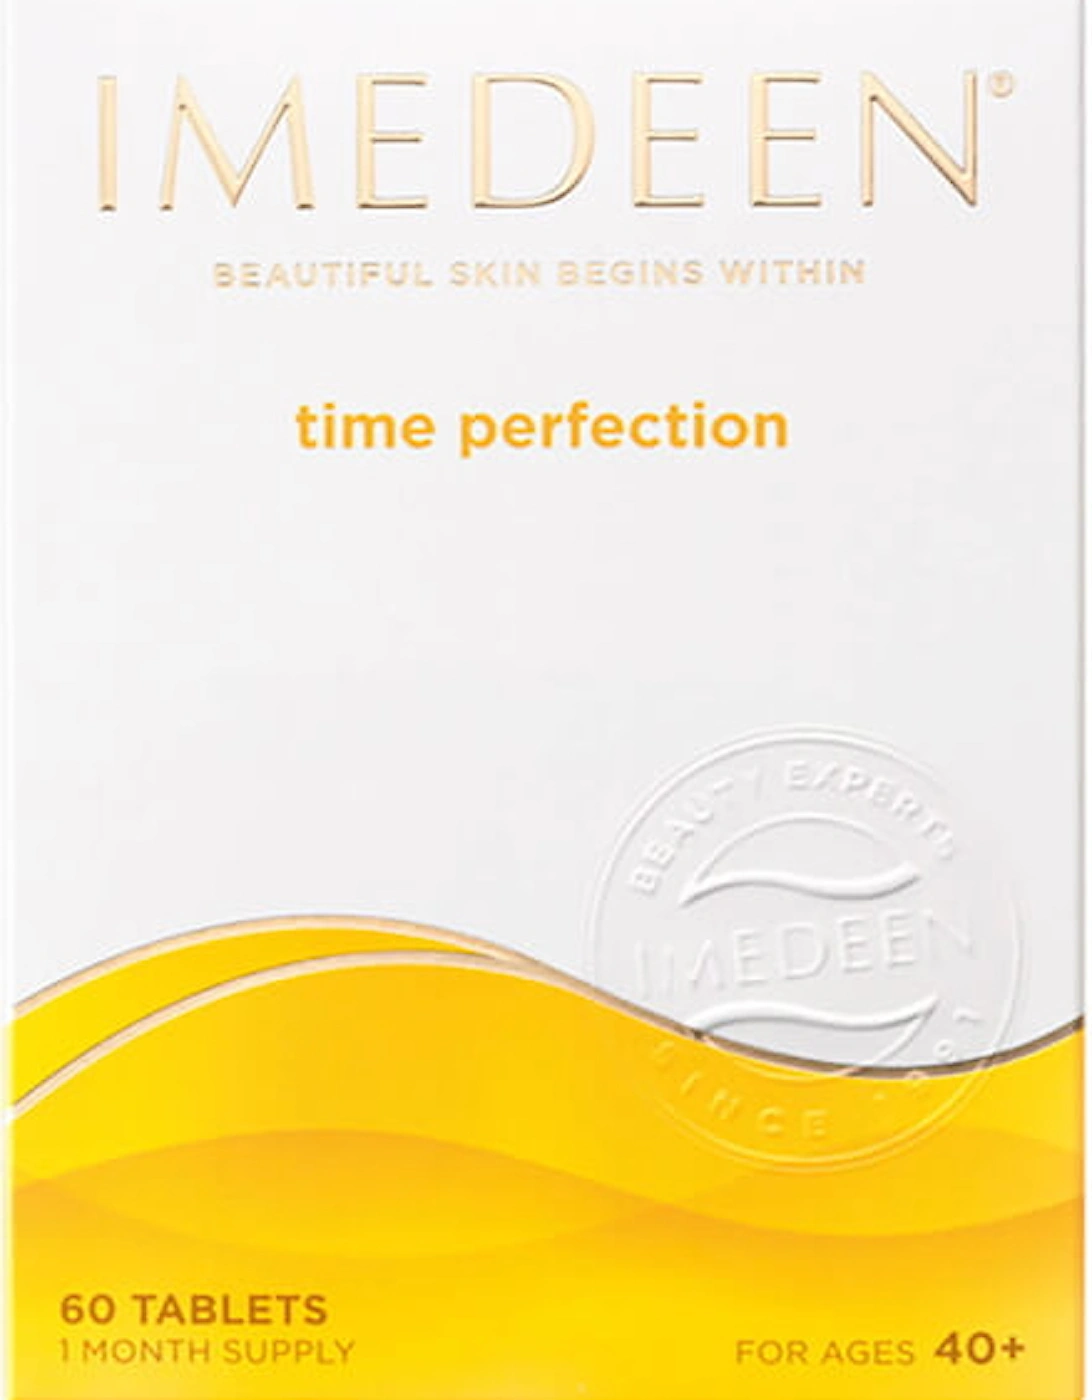 Time Perfection Beauty & Skin Supplement, contains Vitamin C and Zinc, 60 Tablets, Age 40+ - Imedeen, 2 of 1